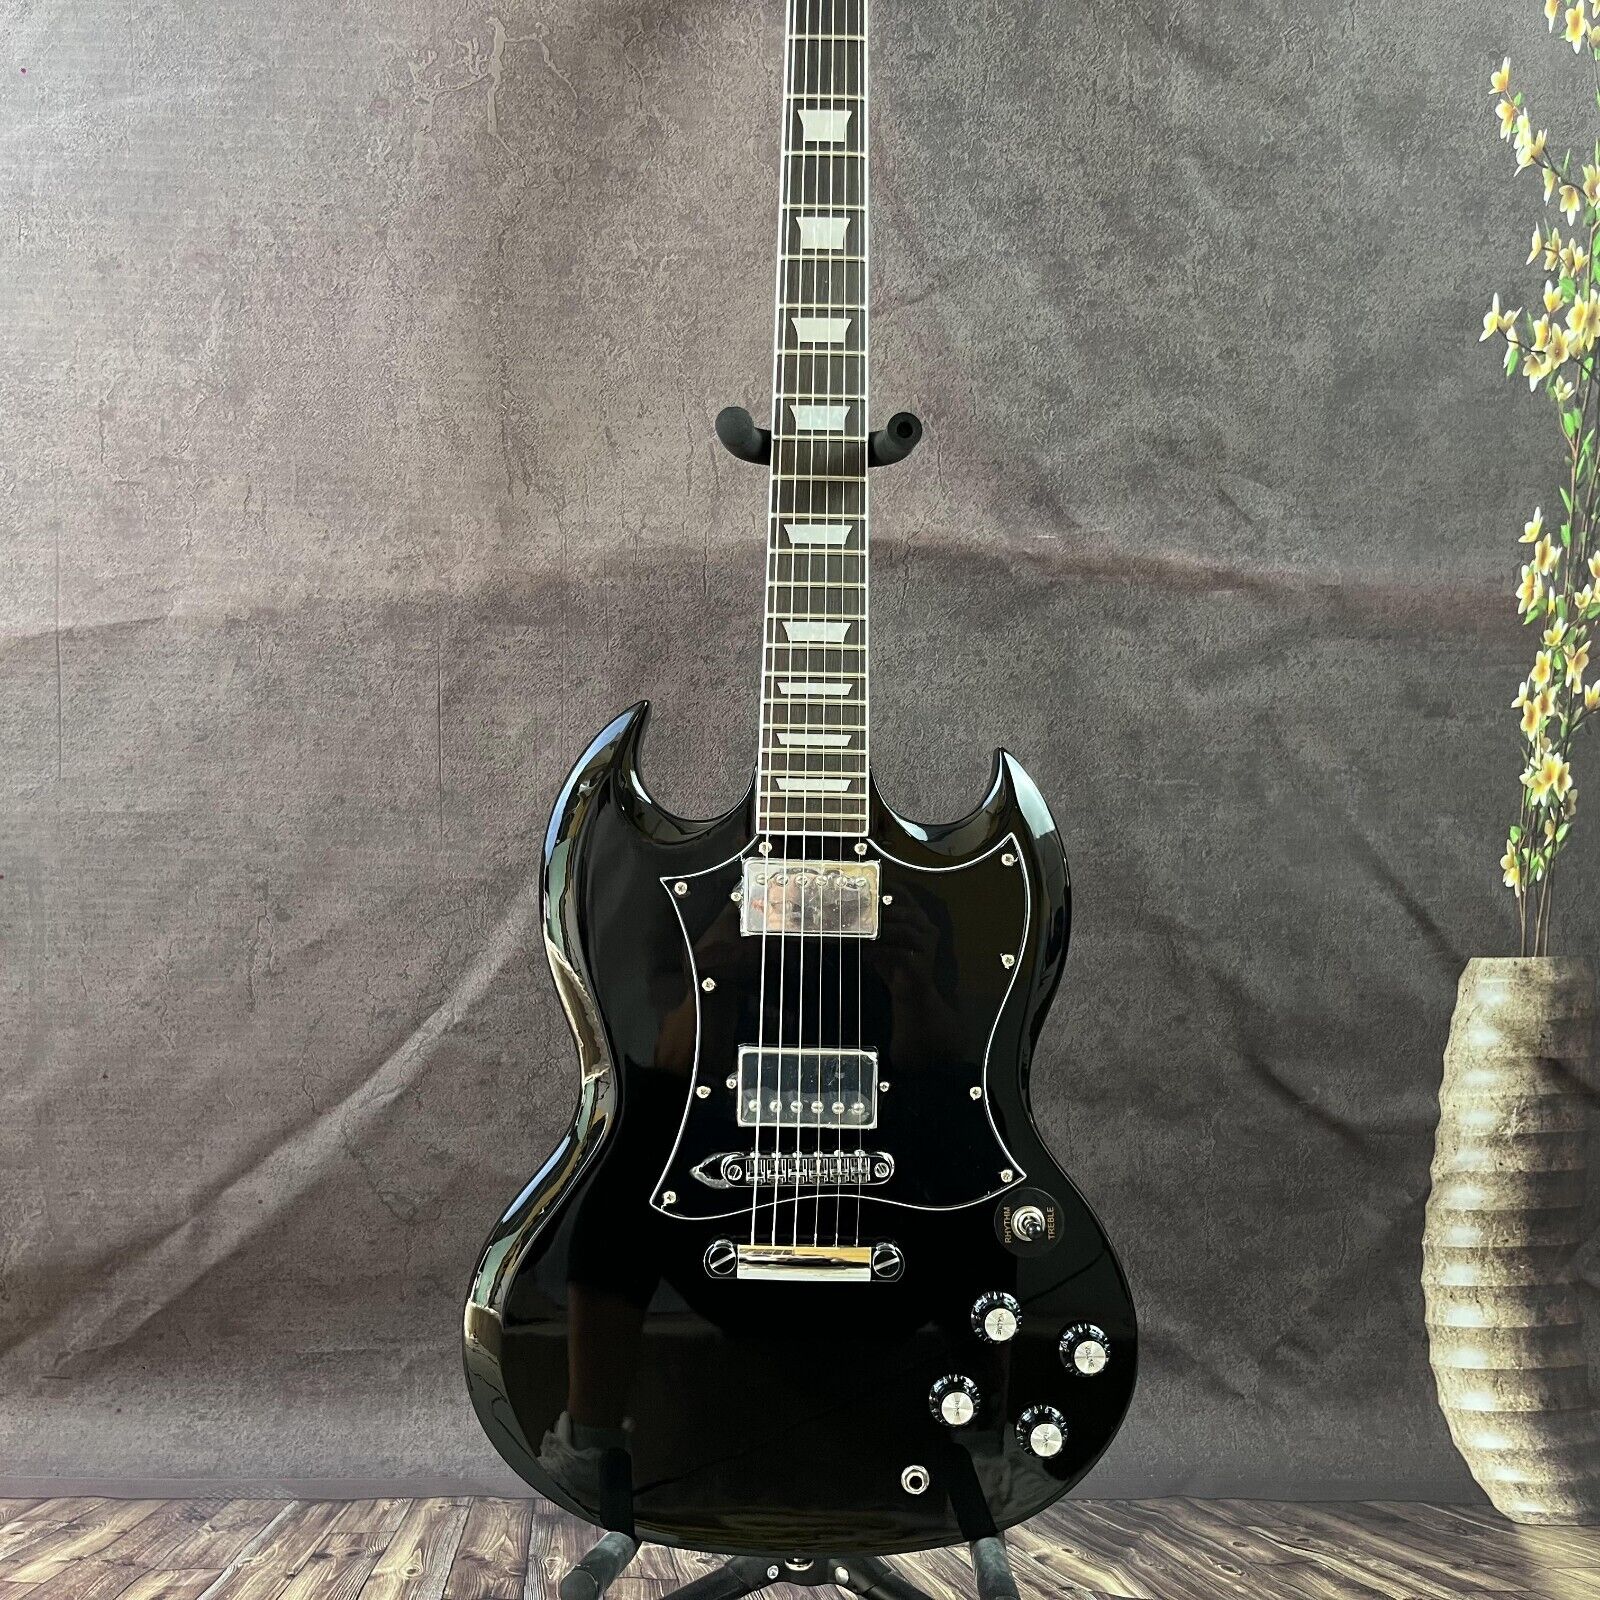 Customized black SG electric guitar chrome plated Shipment from US warehouse